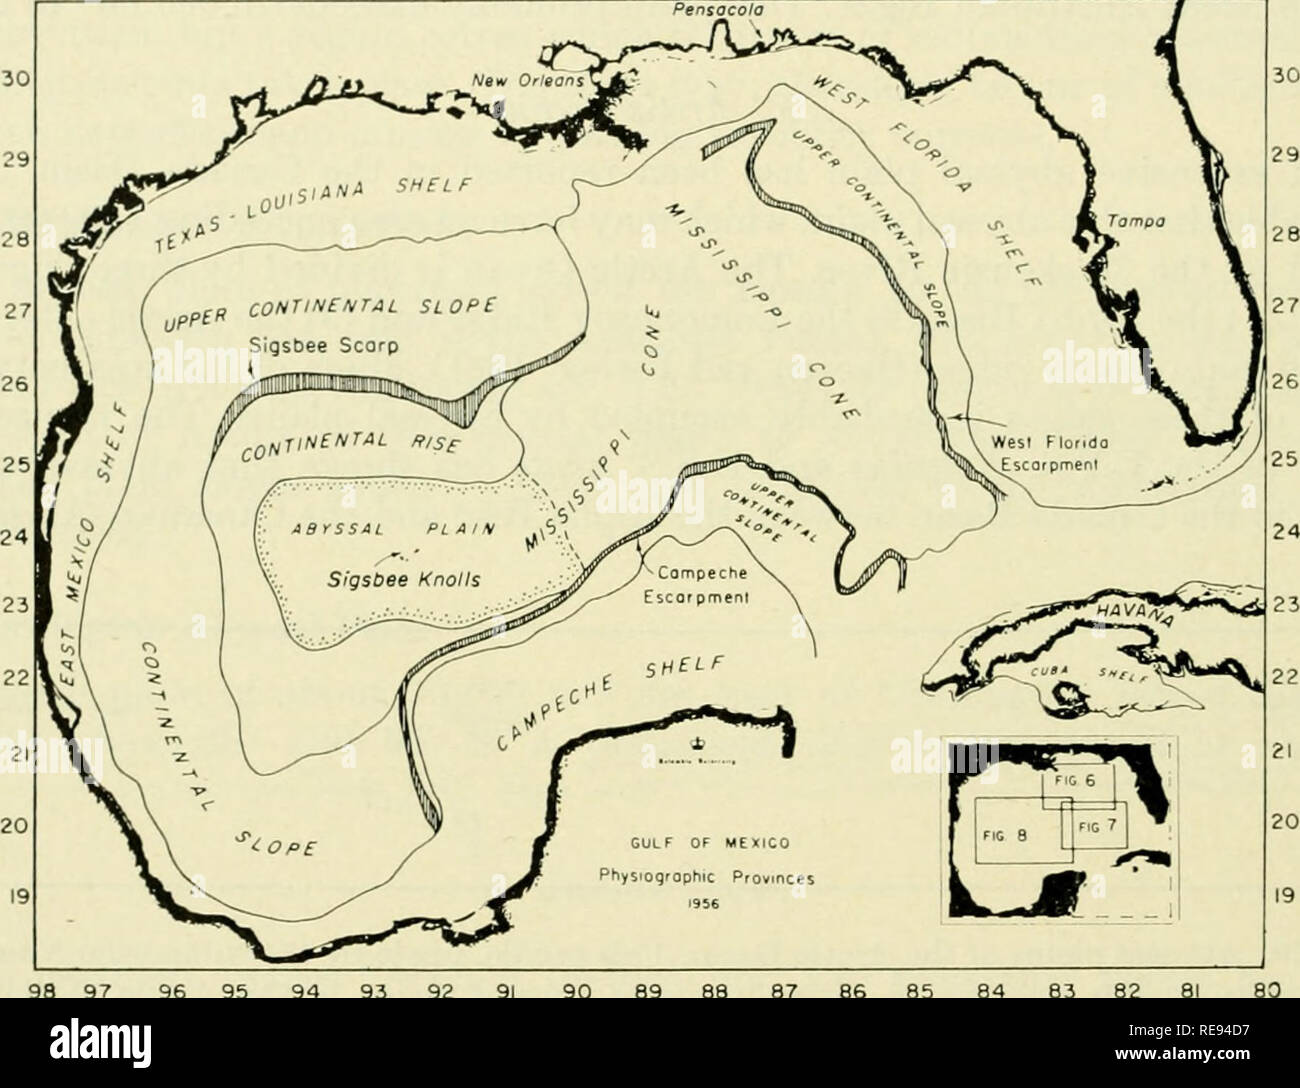 . The Earth beneath the sea : History. Ocean bottom; Marine geophysics. 328 HEEZEN AND LAUGHTON G. Abyssal Plains of Adjacent Seas [chap. 14 Although geiieraUy smaller in size than the great abyssal i^lains of the oceans, abyssal plains are also found in the adjacent seas. a. Mediterranean Sea The ^Mediterranean Sea is divided into three deep basins, the Western Mediterranean, the Tyrrhenian Sea and the Eastern Mediterranean. The floor of the Western Mediterranean is nearly completely filled by the Balearic 98 97 96 95 94 93 92 91 90 89 88 87 86 85 84 83 82 81 80. 98 97 96 95 94 93 92 91 90 89 Stock Photo